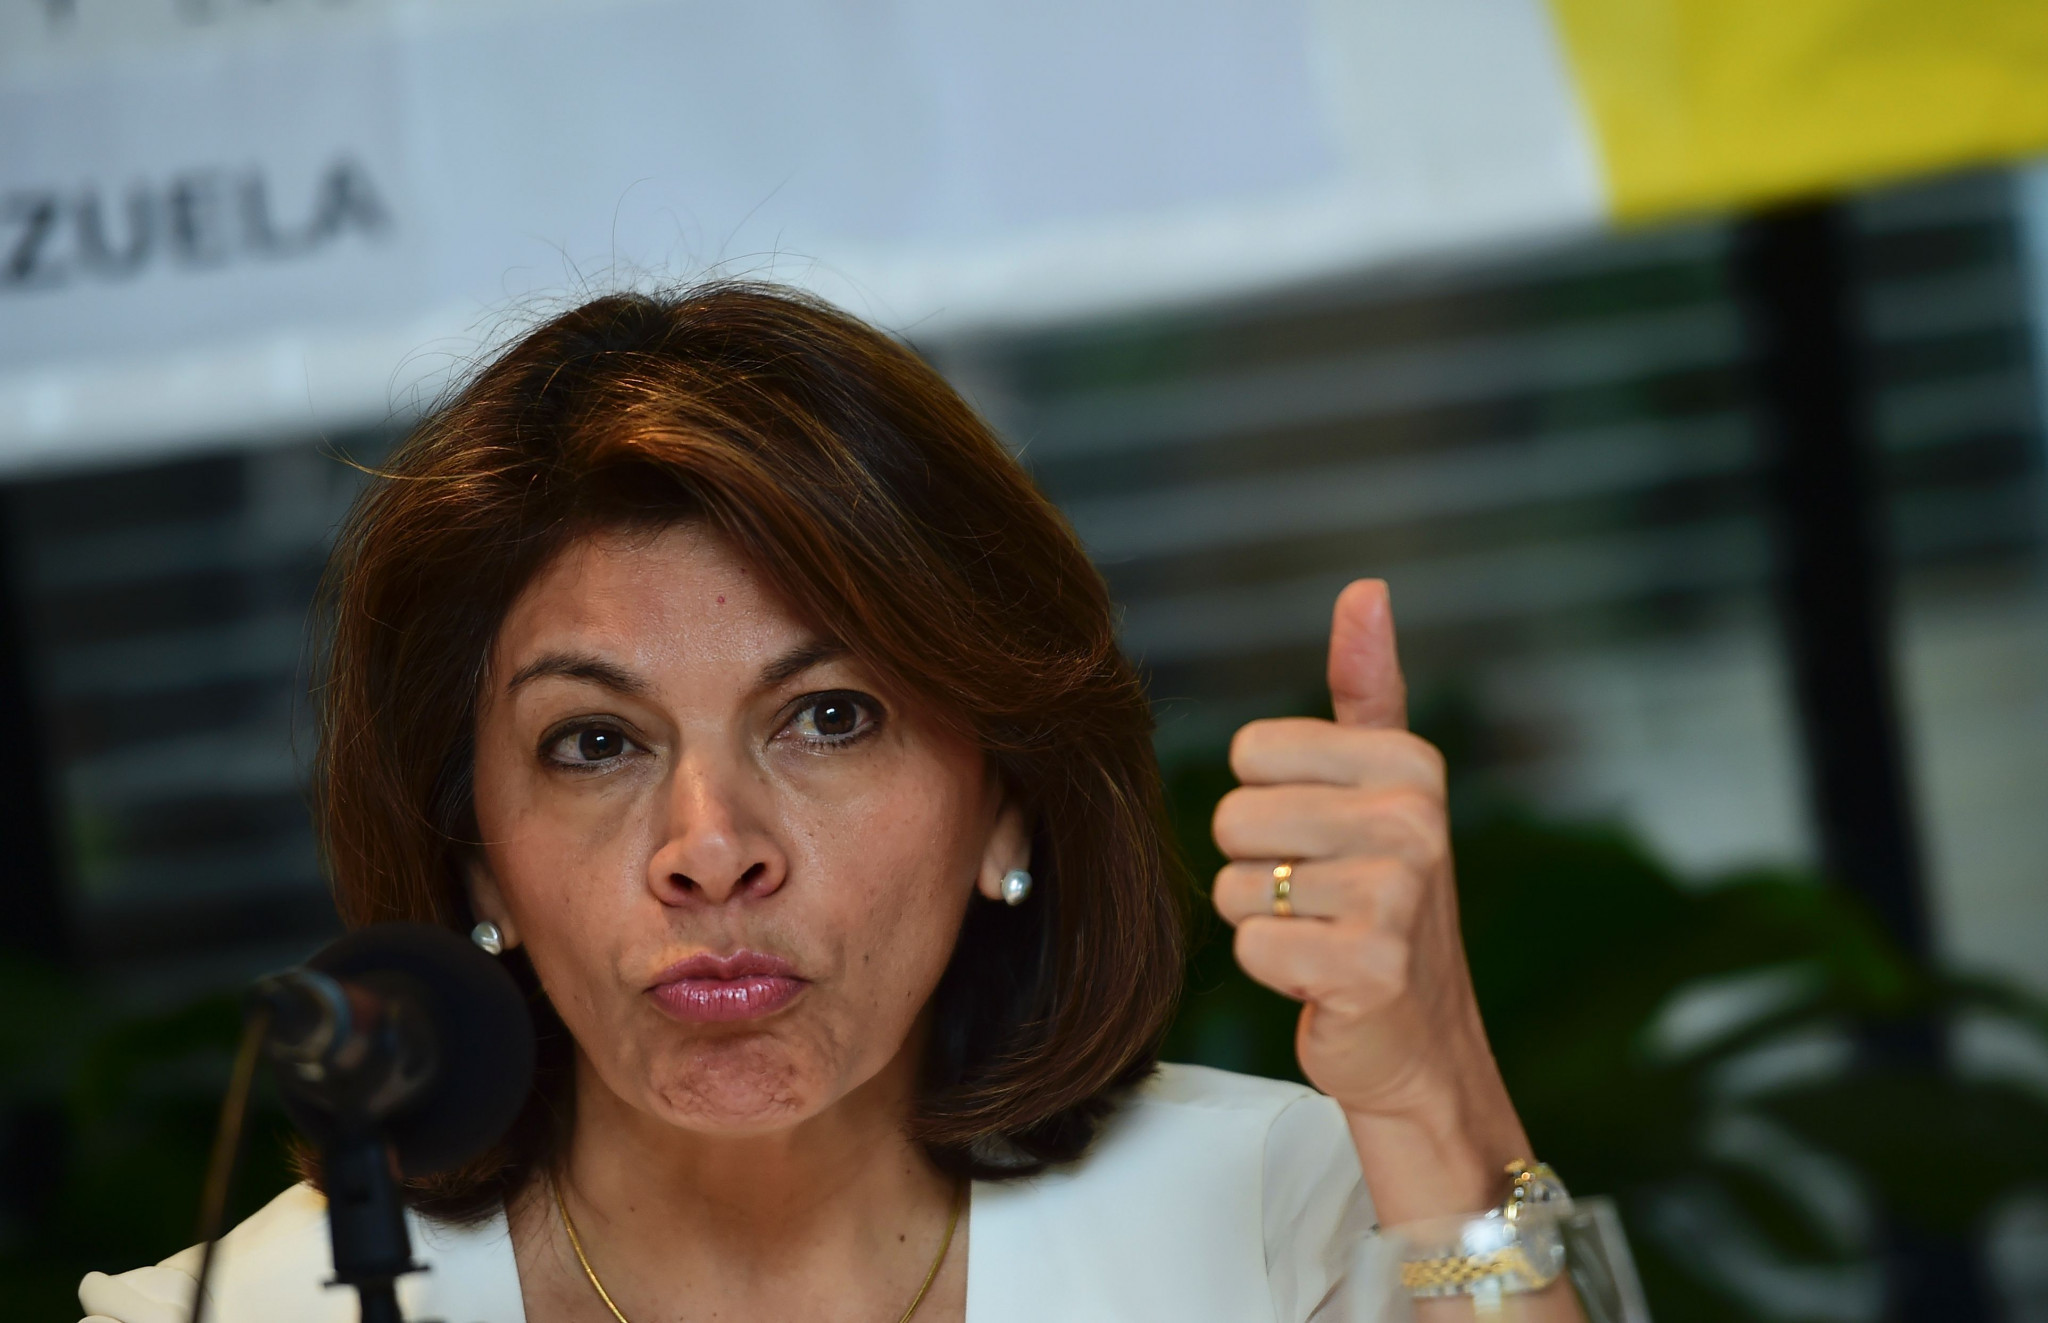 Costa Rica's former President Laura Chinchilla is among 10 new members proposed for election to the International Olympic Committee ©Getty Images